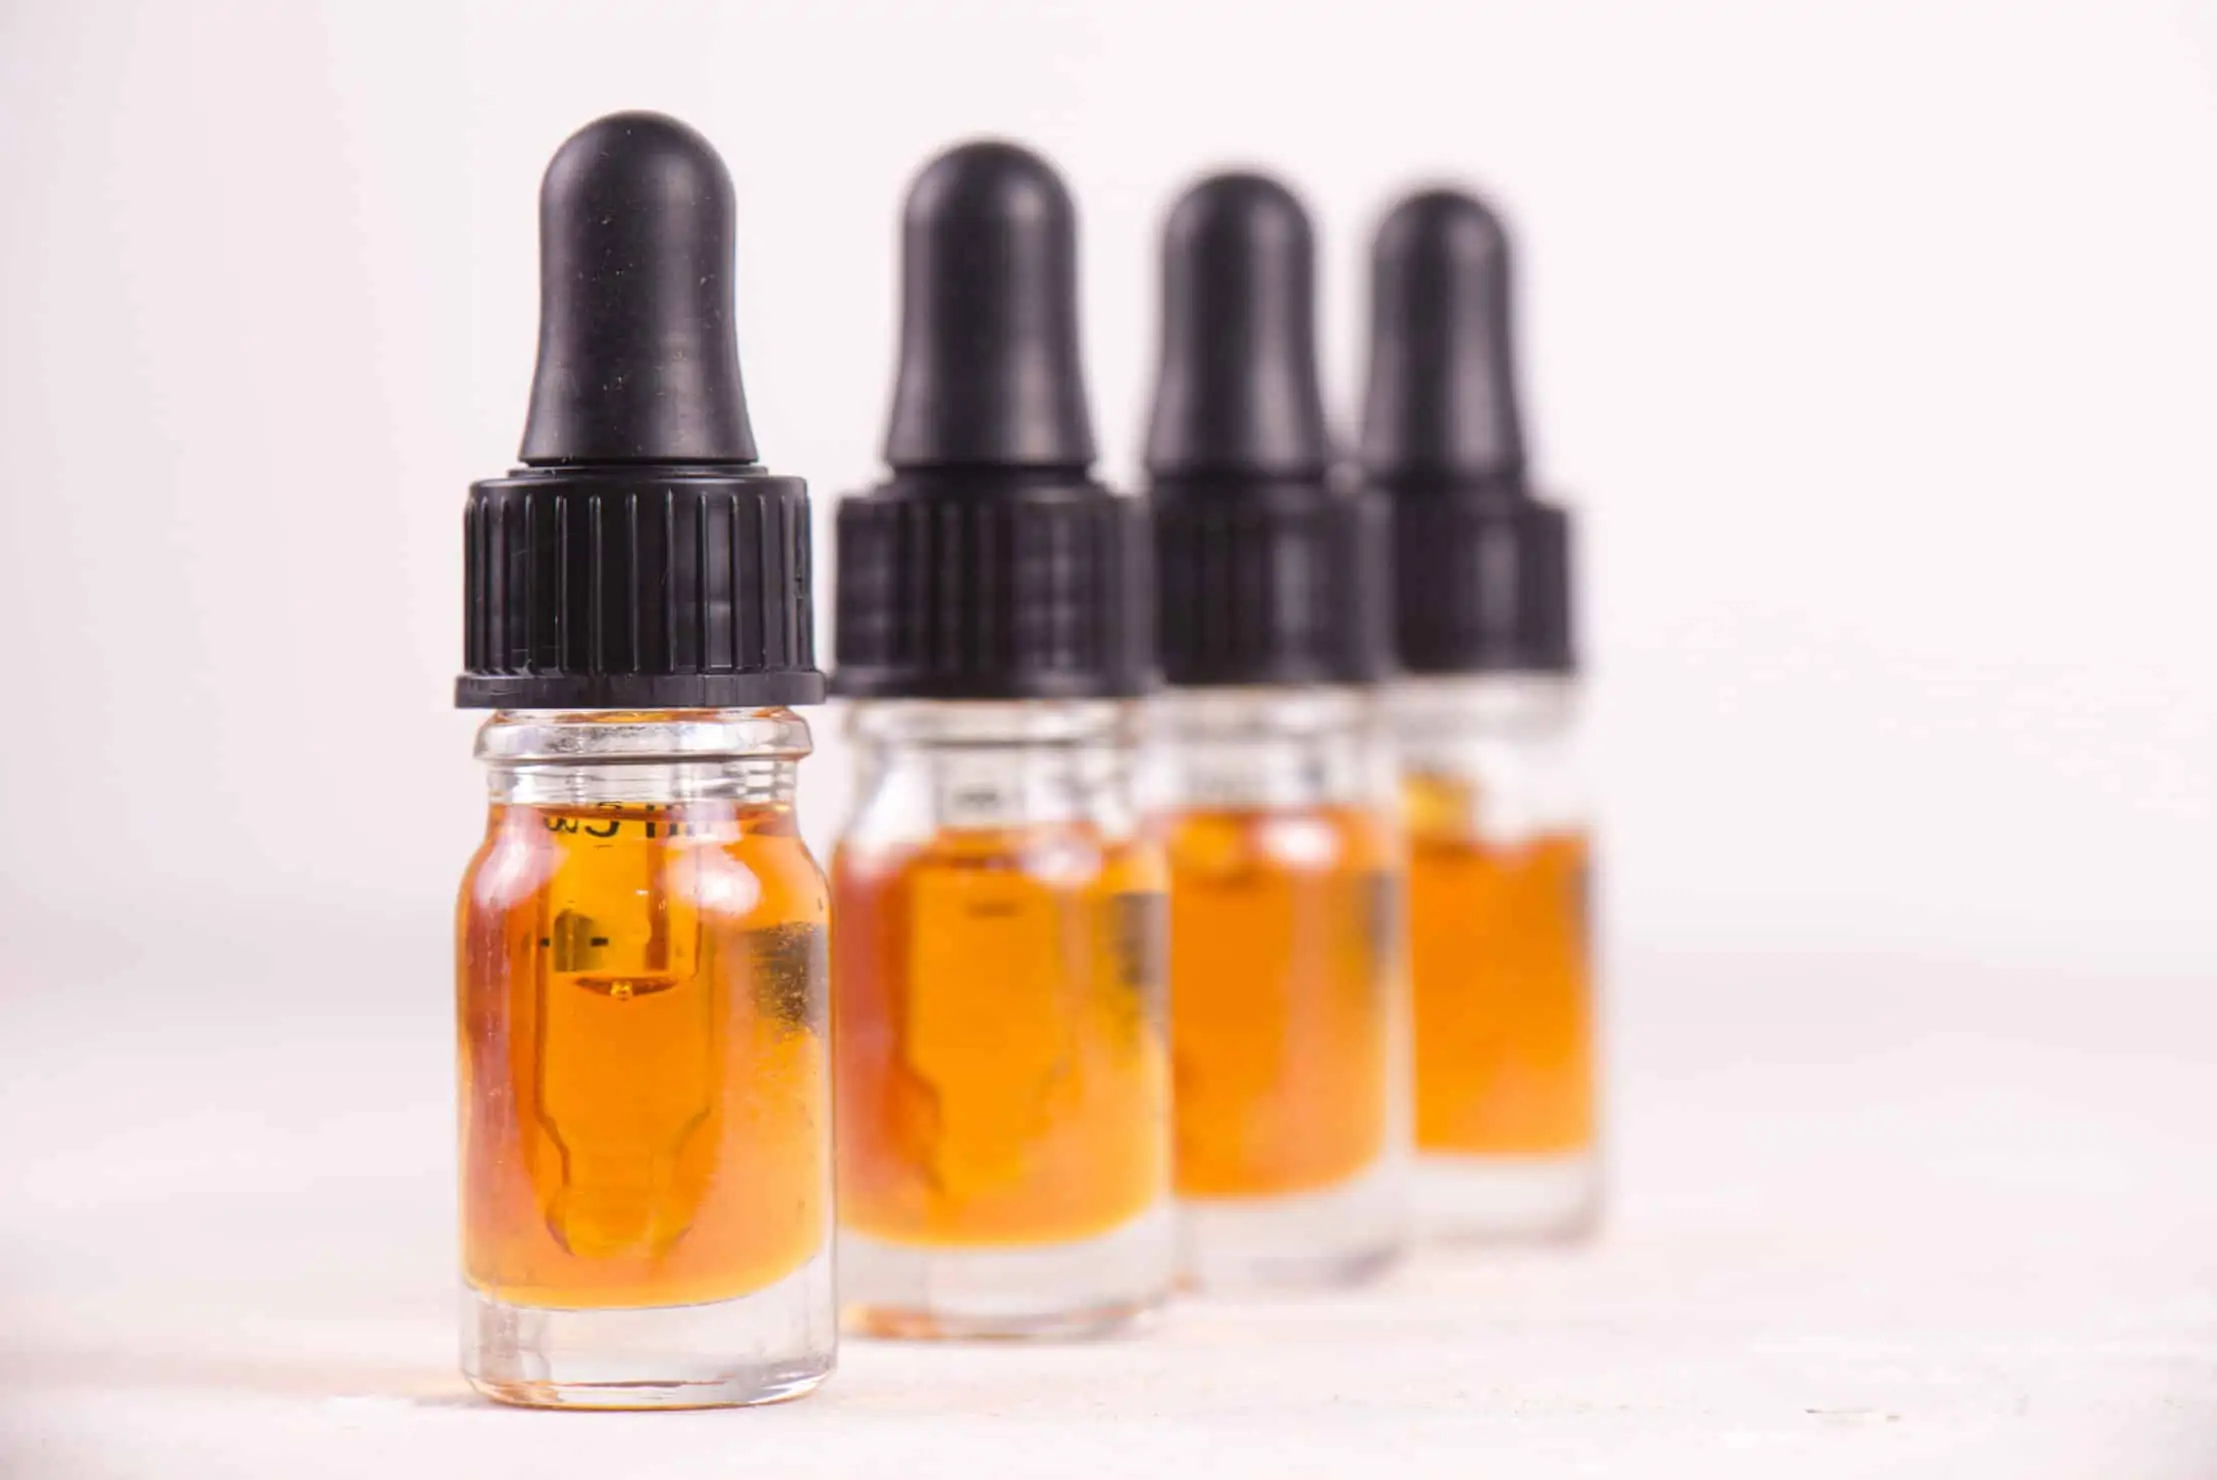 It’s Time For CBD Products To Be Fully Legal